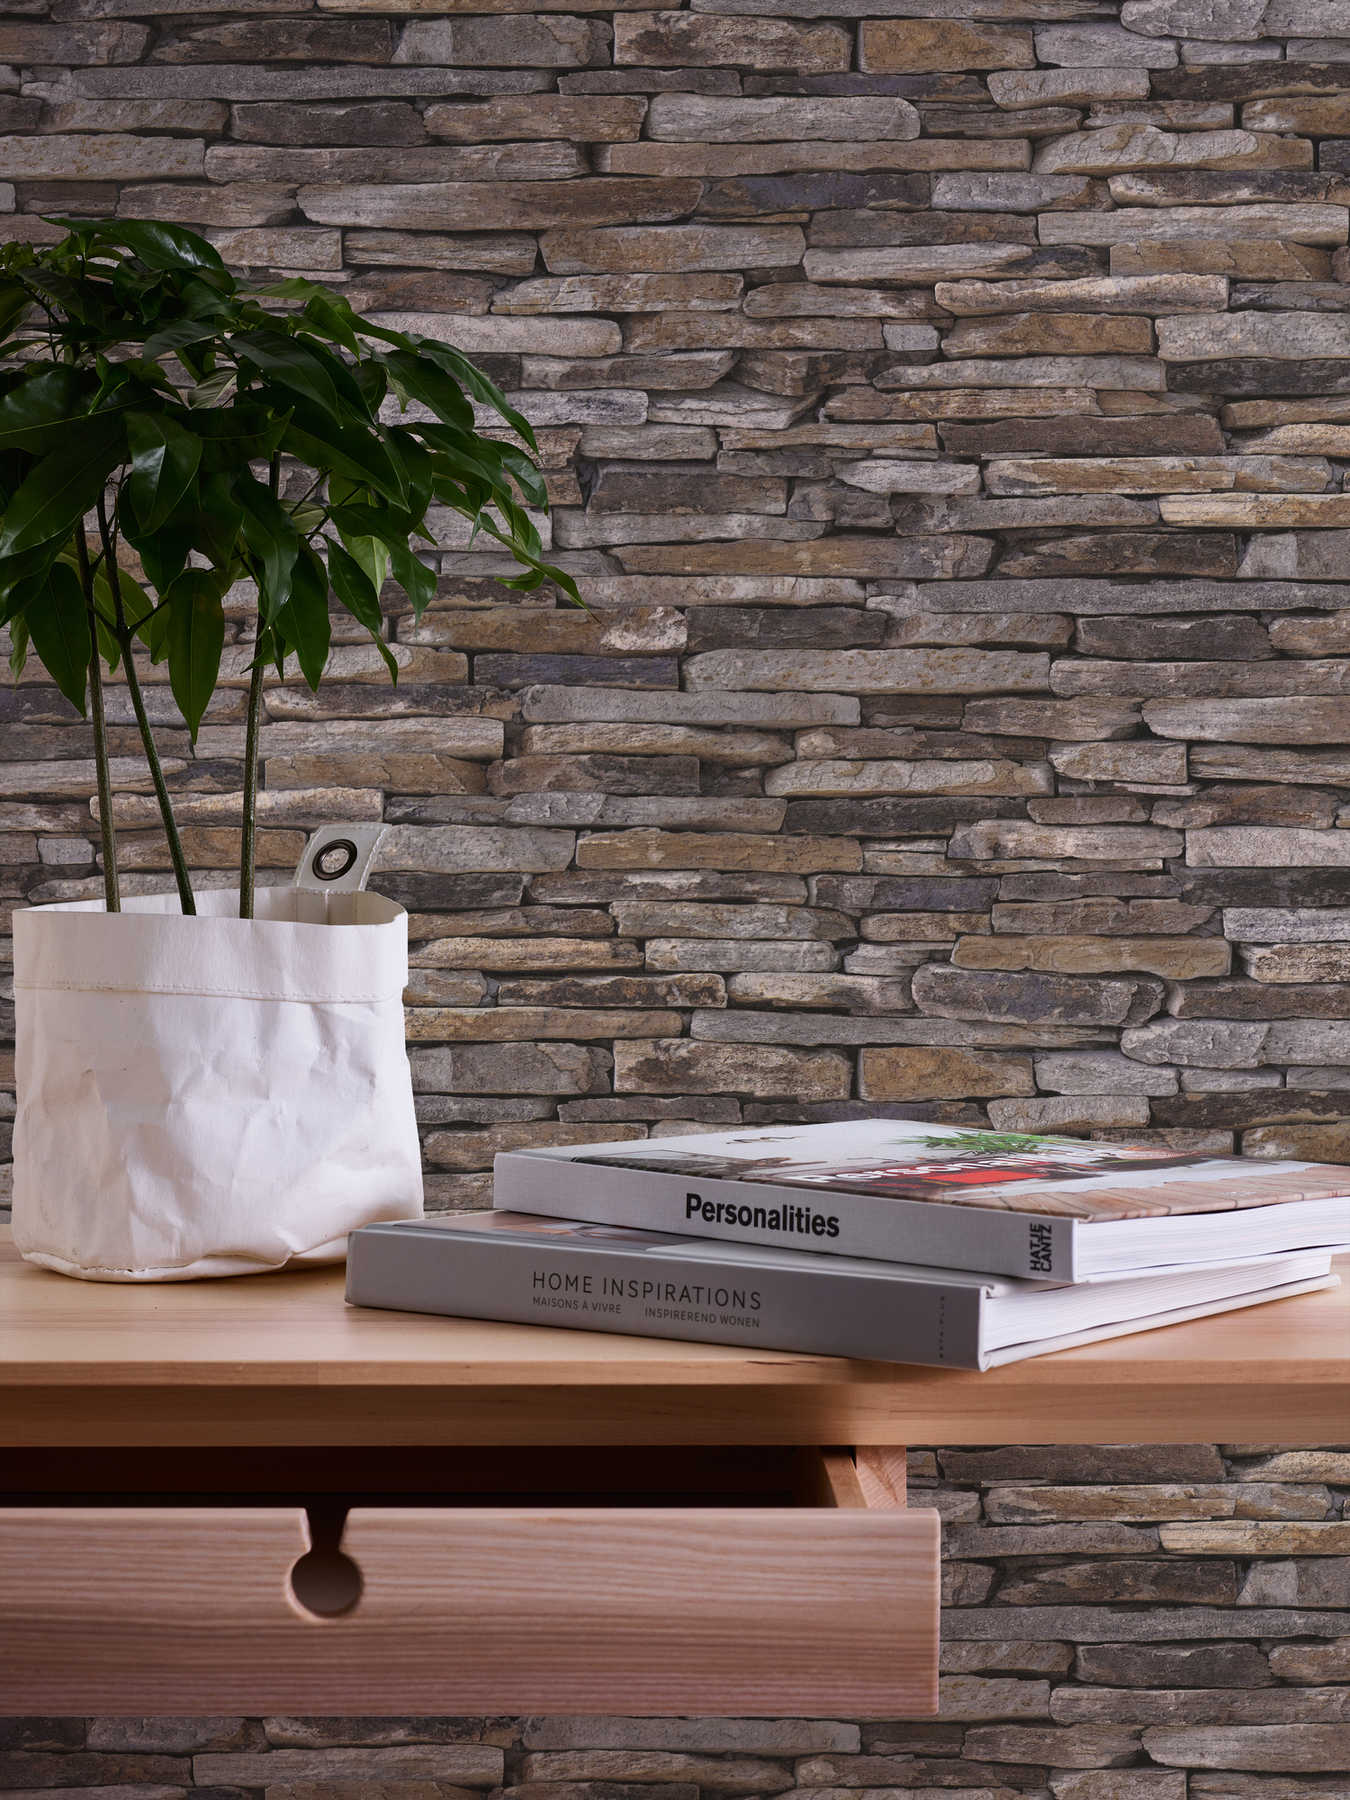             Stone wallpaper with dry stone wall & realistic natural stone - brown, beige, yellow
        